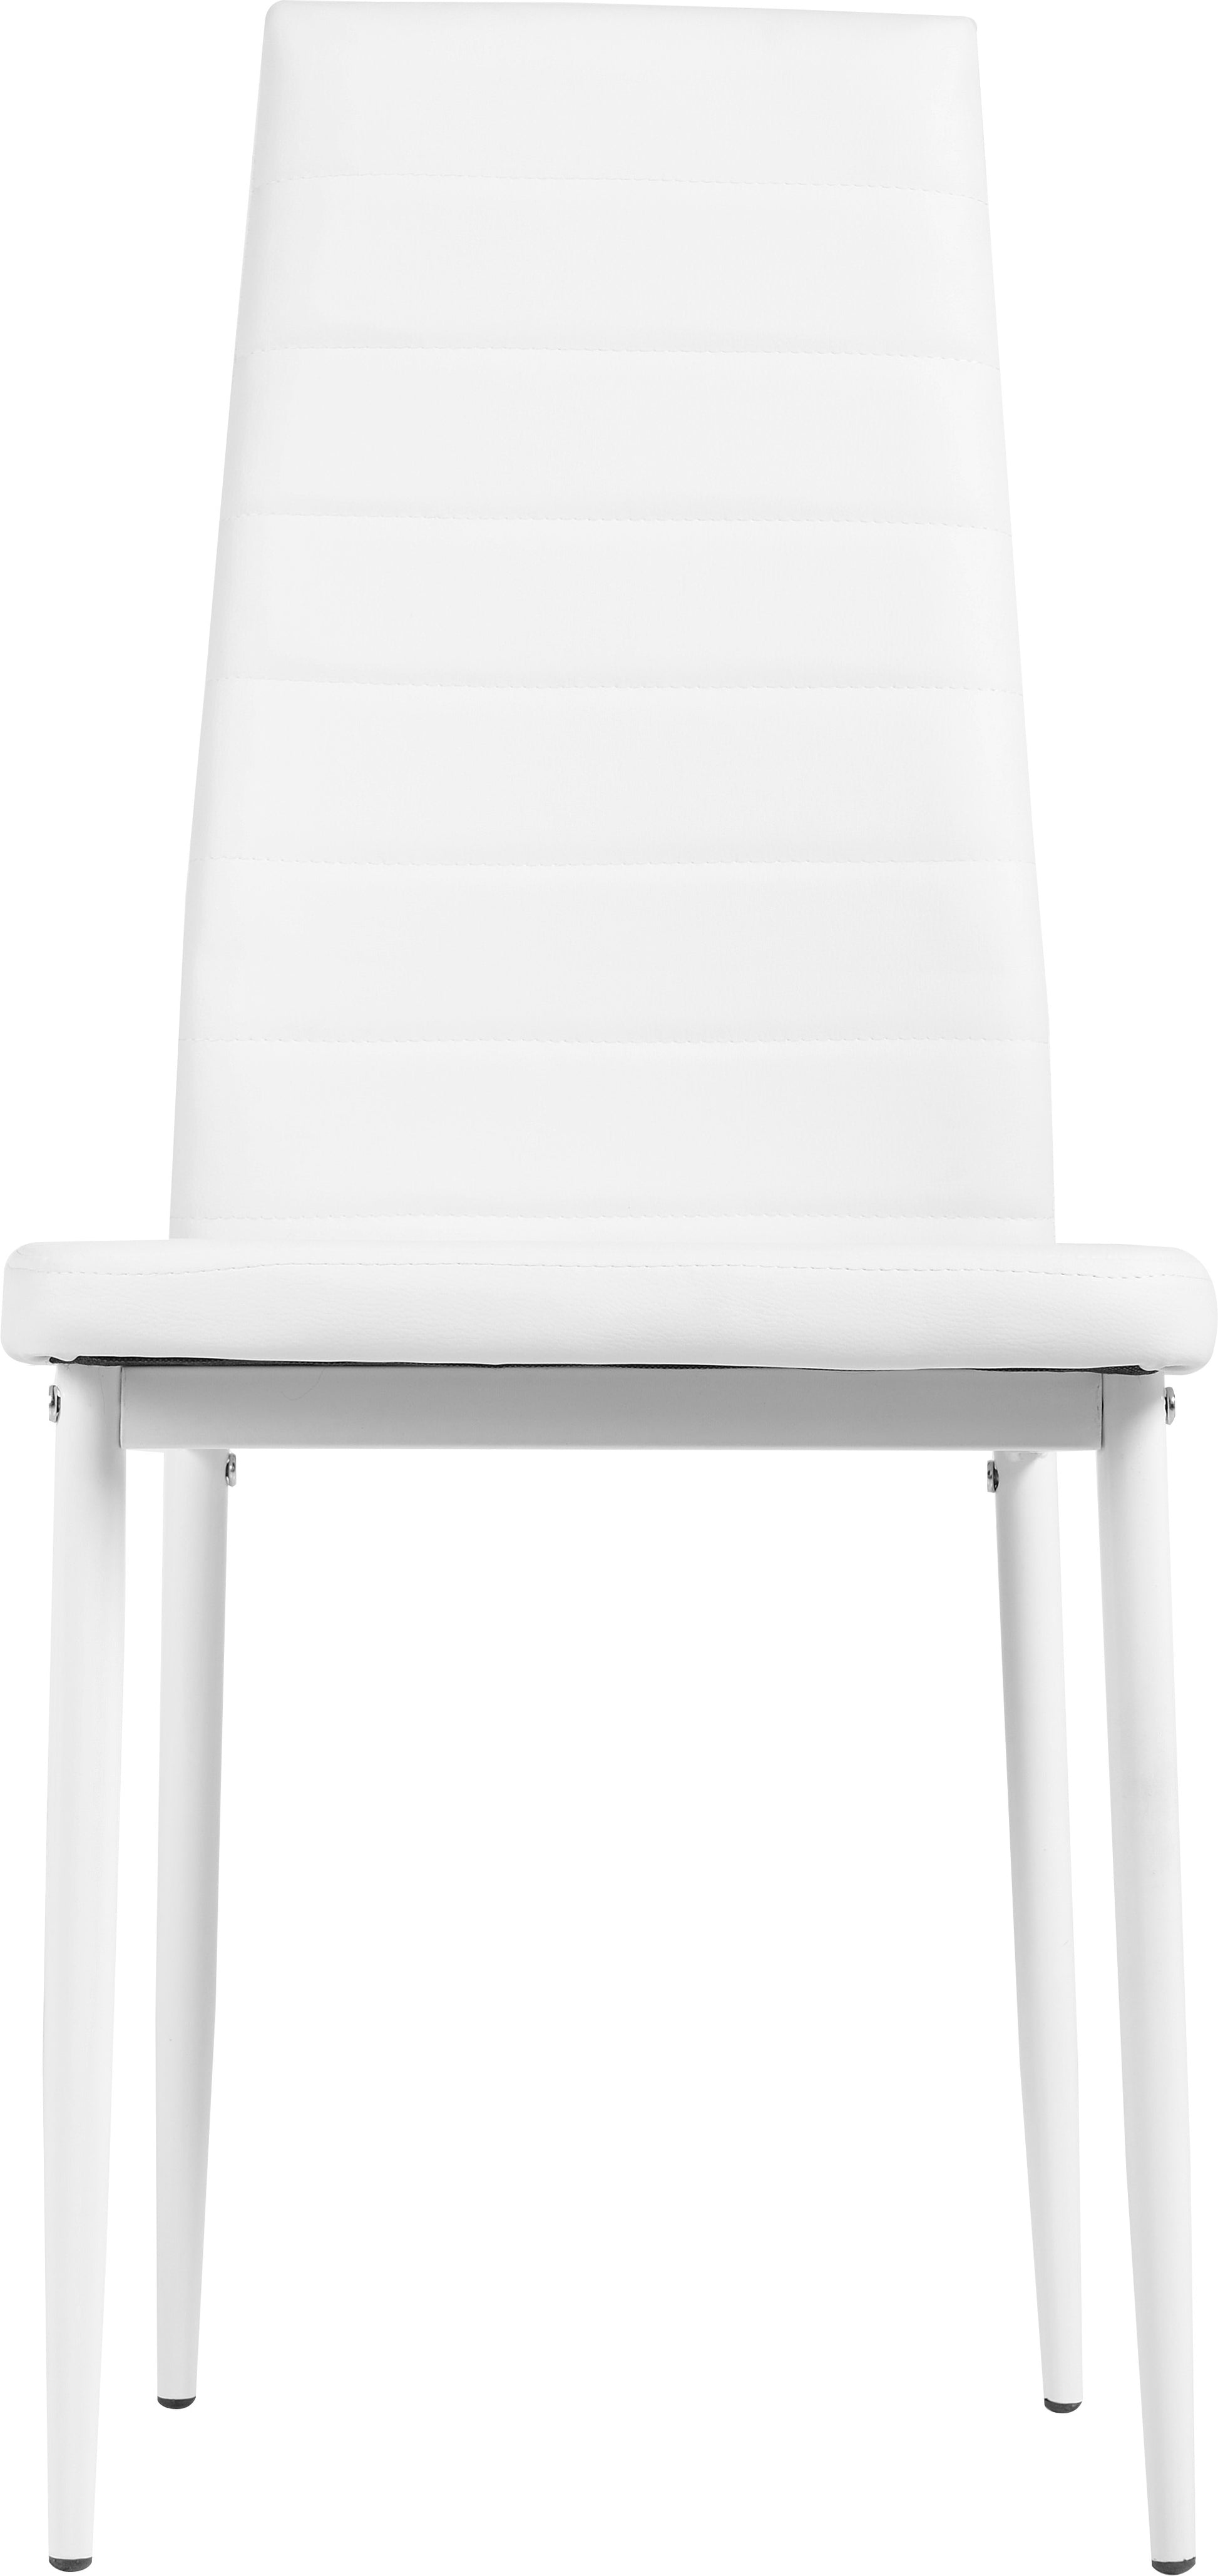 Abbey Chair x 2 White Faux Leather- The Right Buy Store